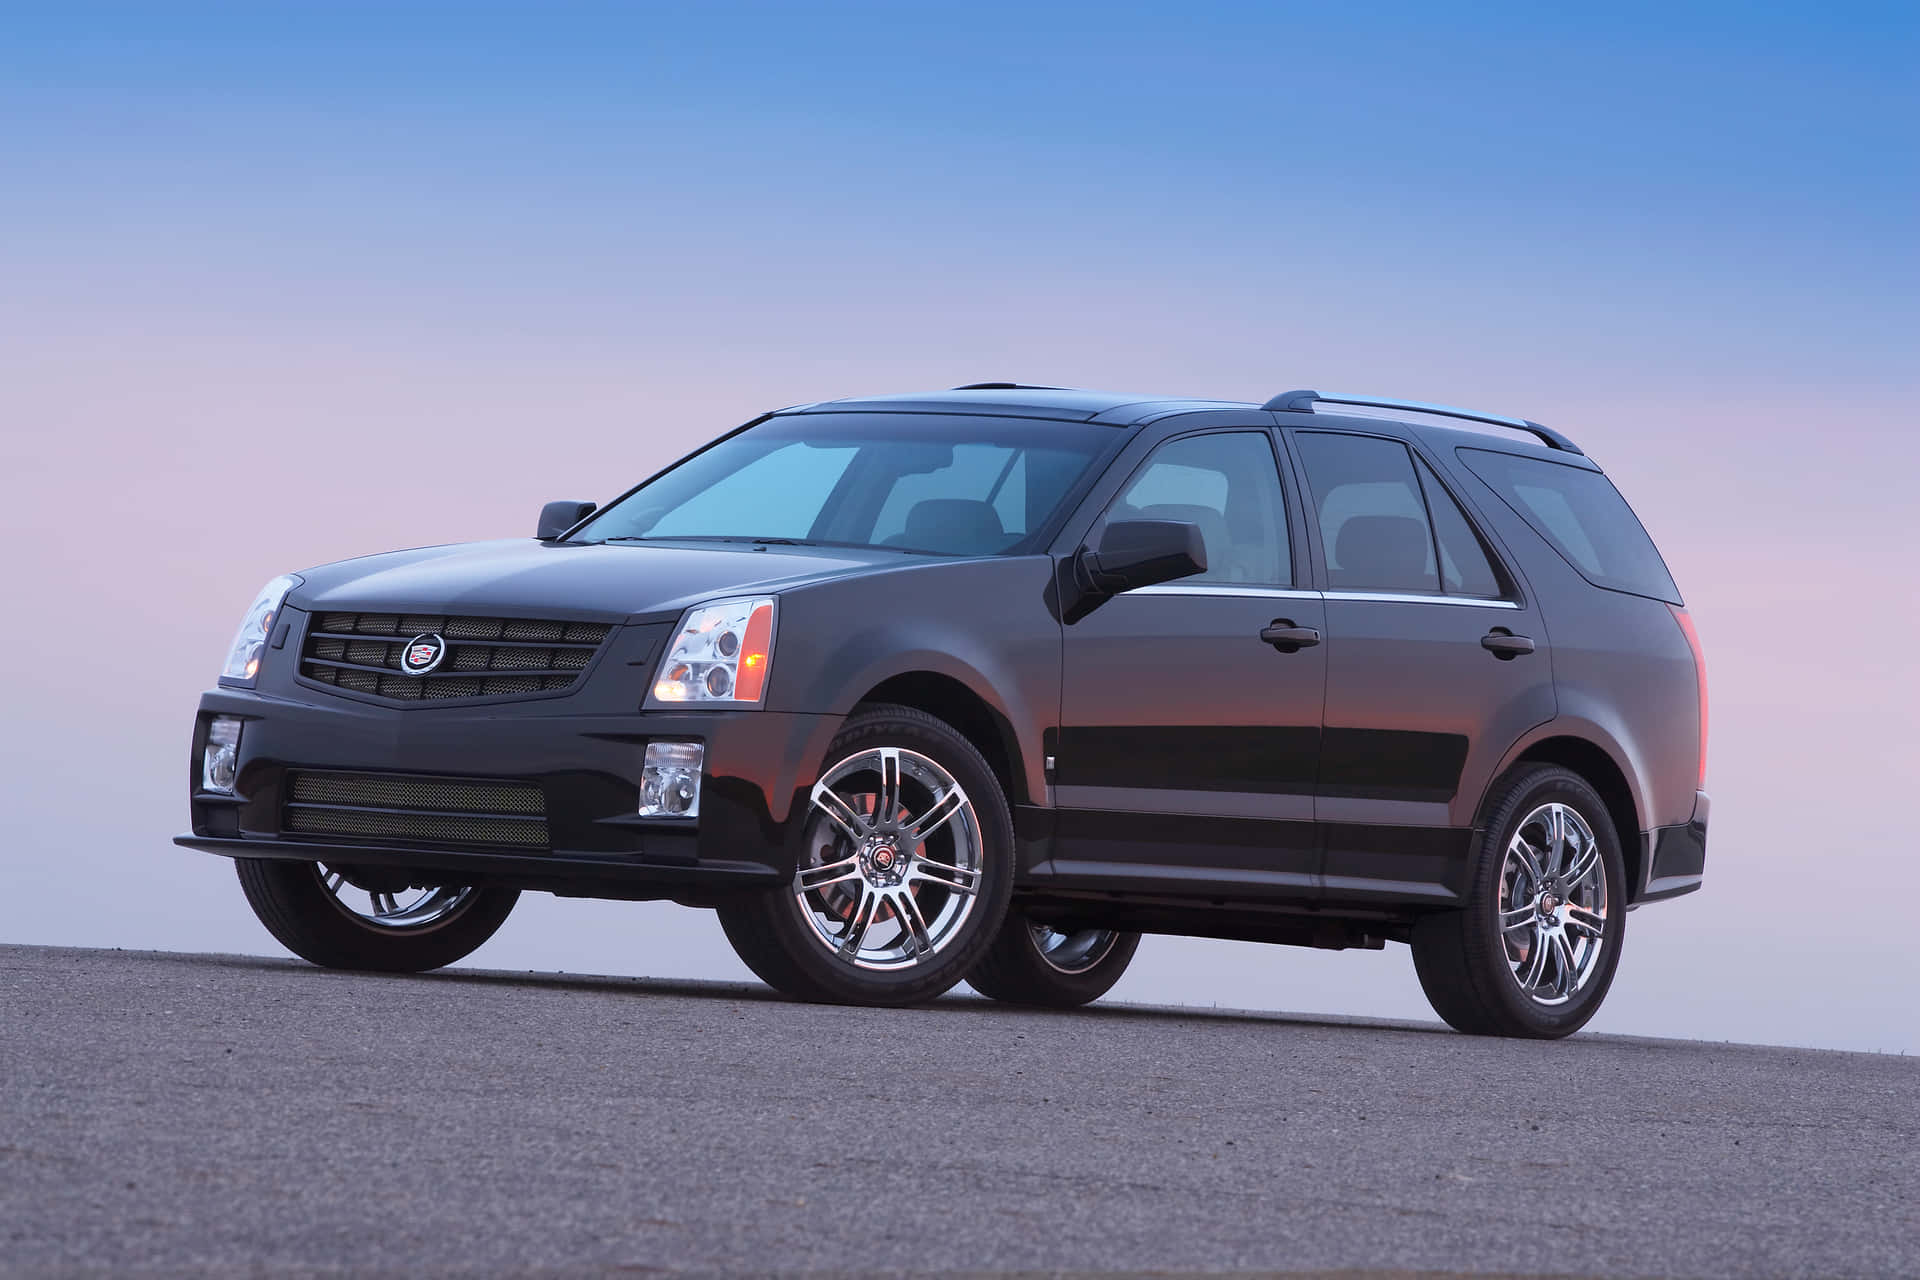 Caption: Stunning Cadillac SRX on the open road Wallpaper